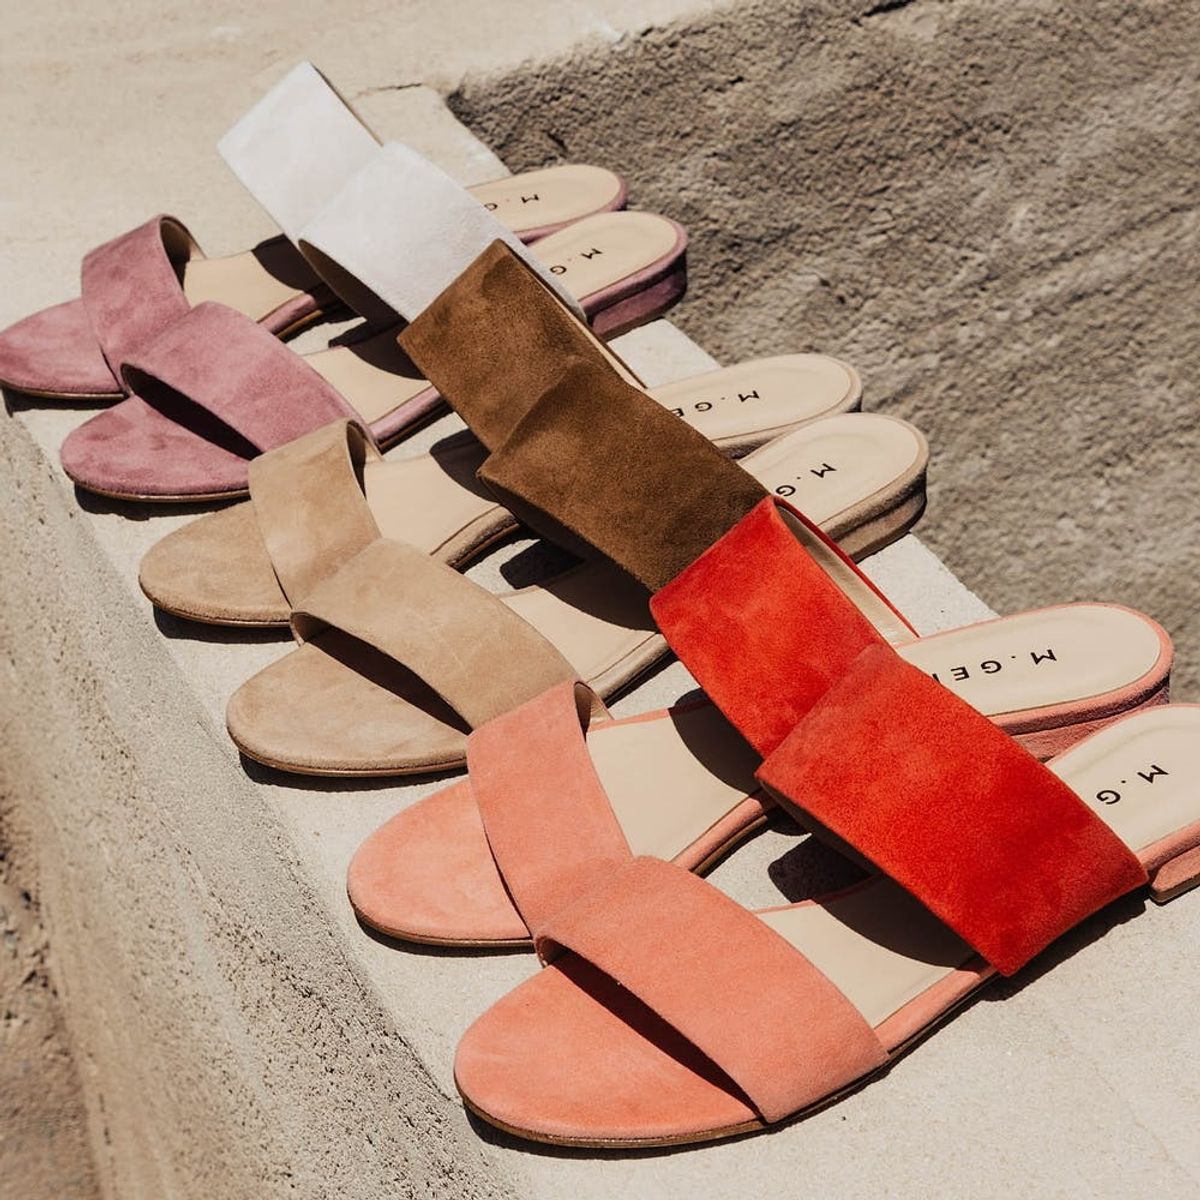 M.Gemi Just Created the Sandal of the Summer With THIS Cult Beauty Maven